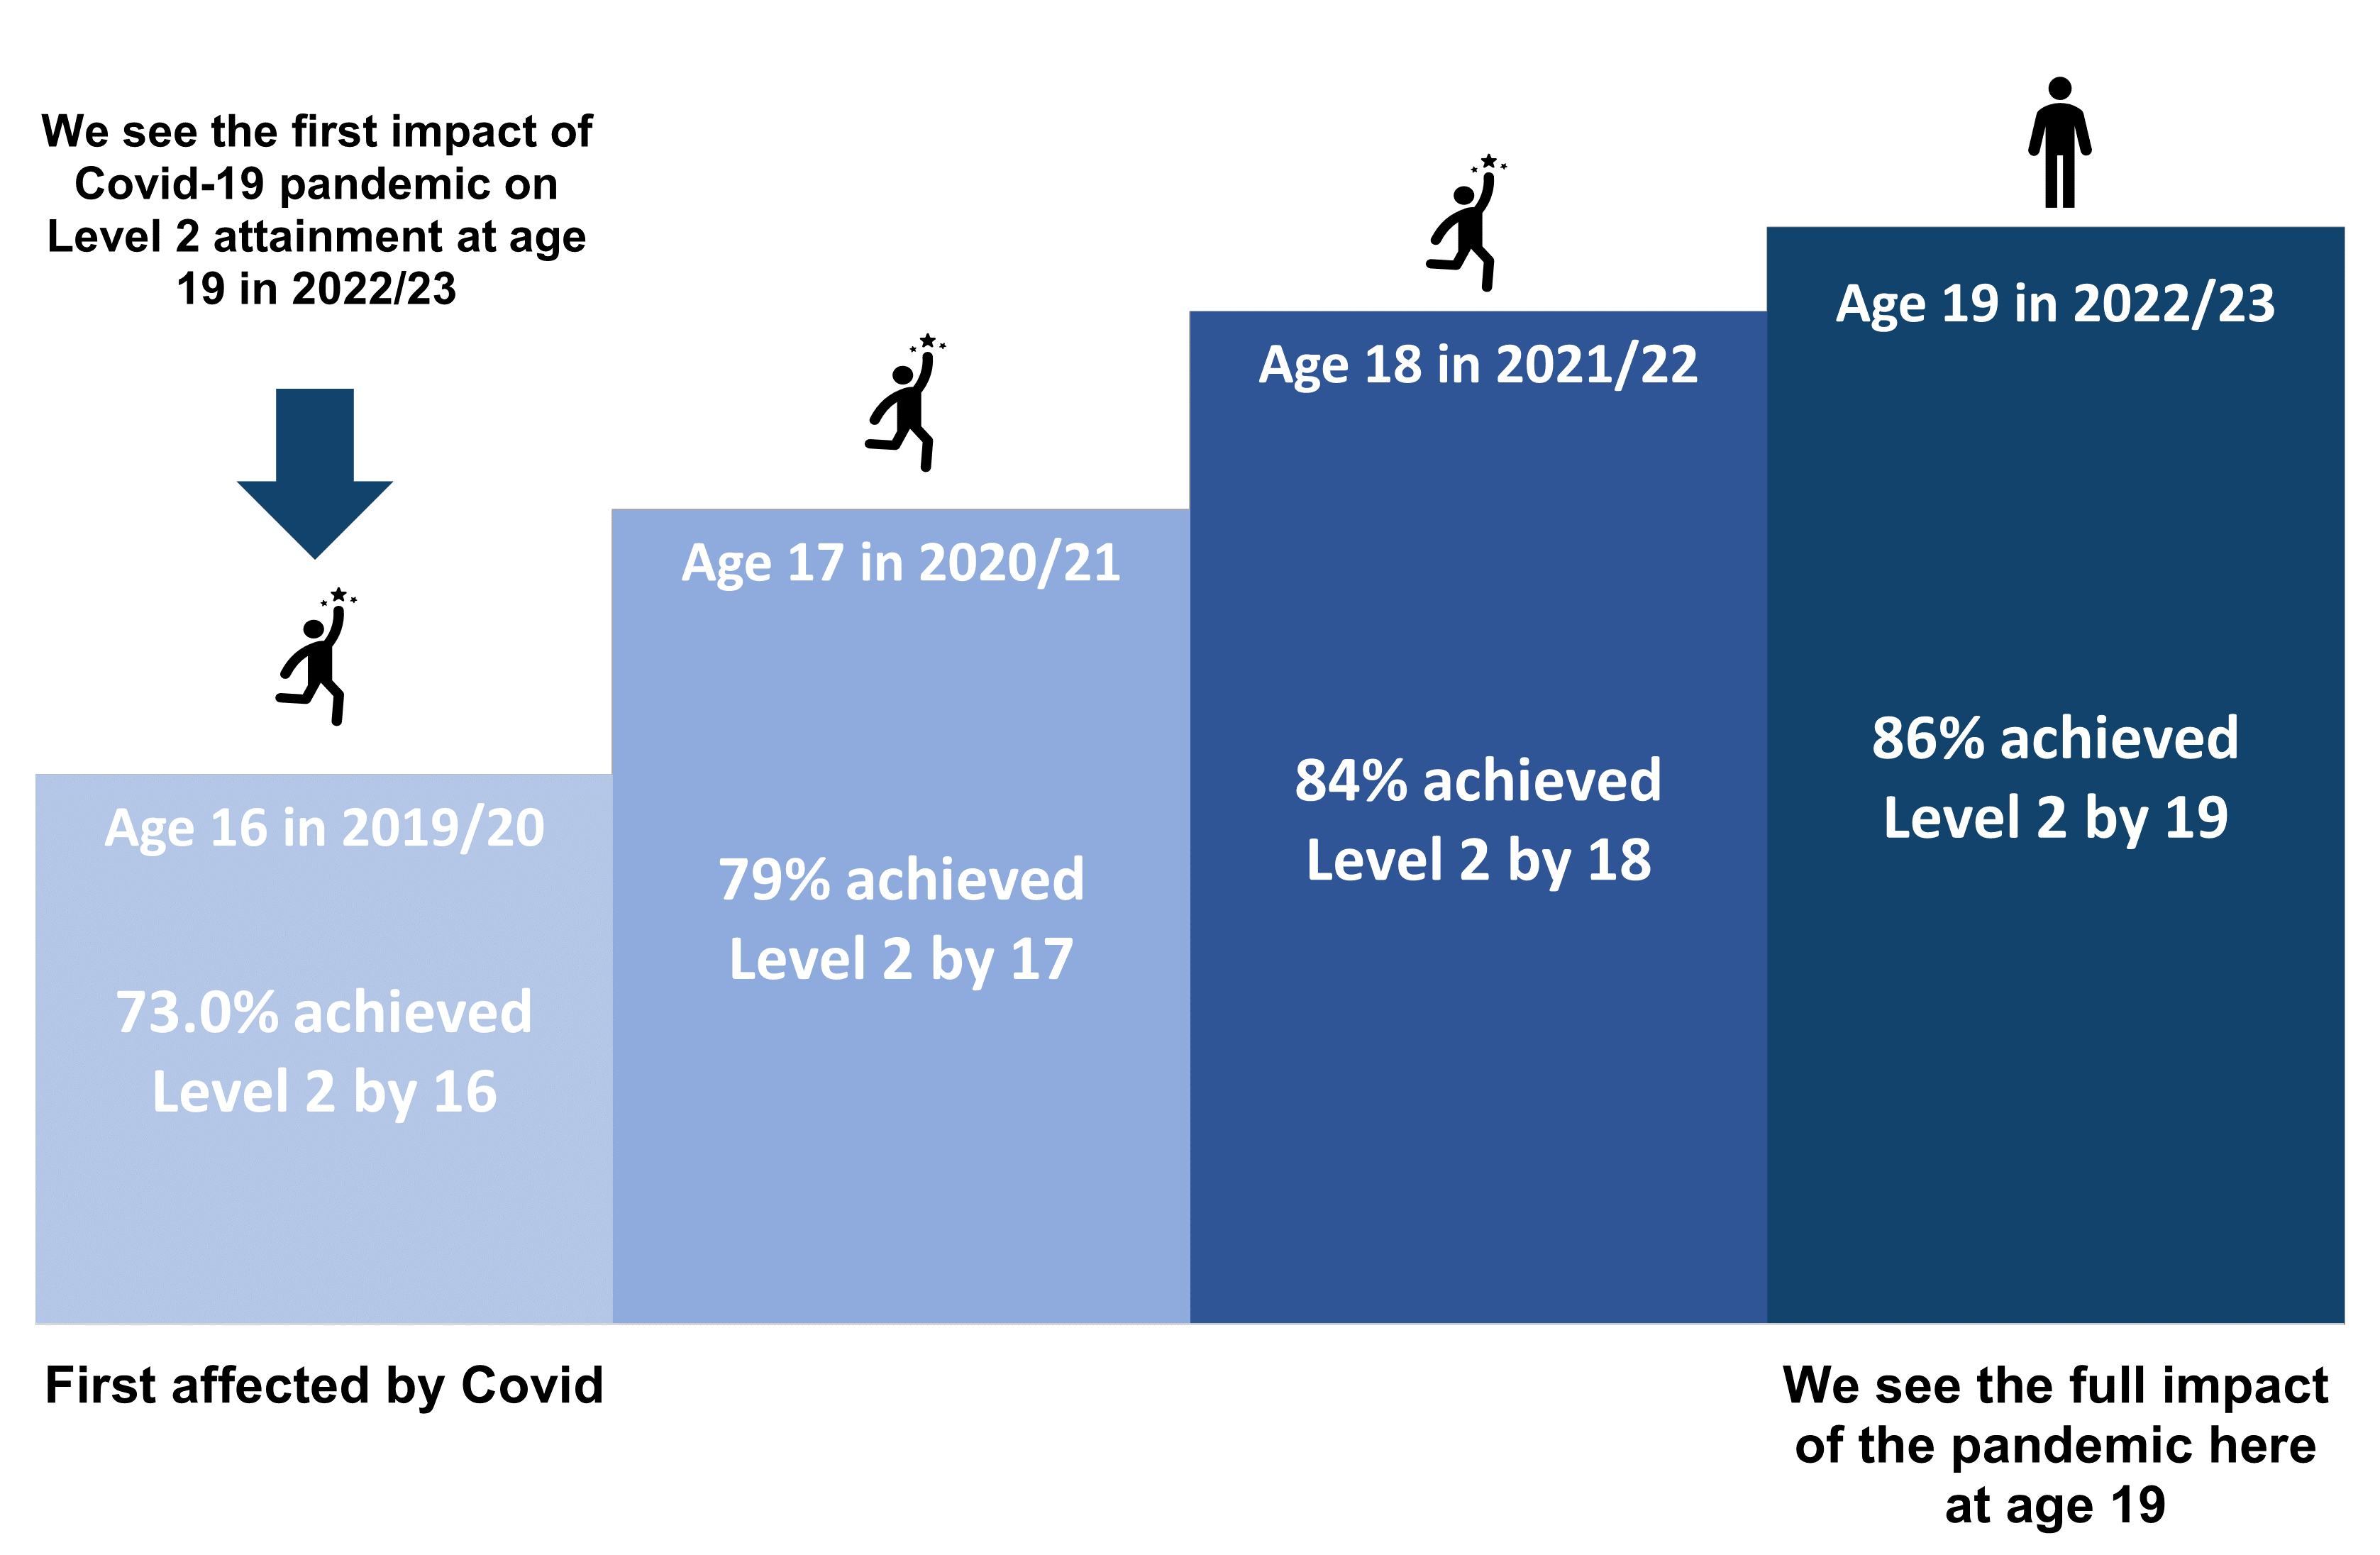 Infographic showing 19 year olds in 2022/23 were 16 in 2019/20, the first cohort affected by covid